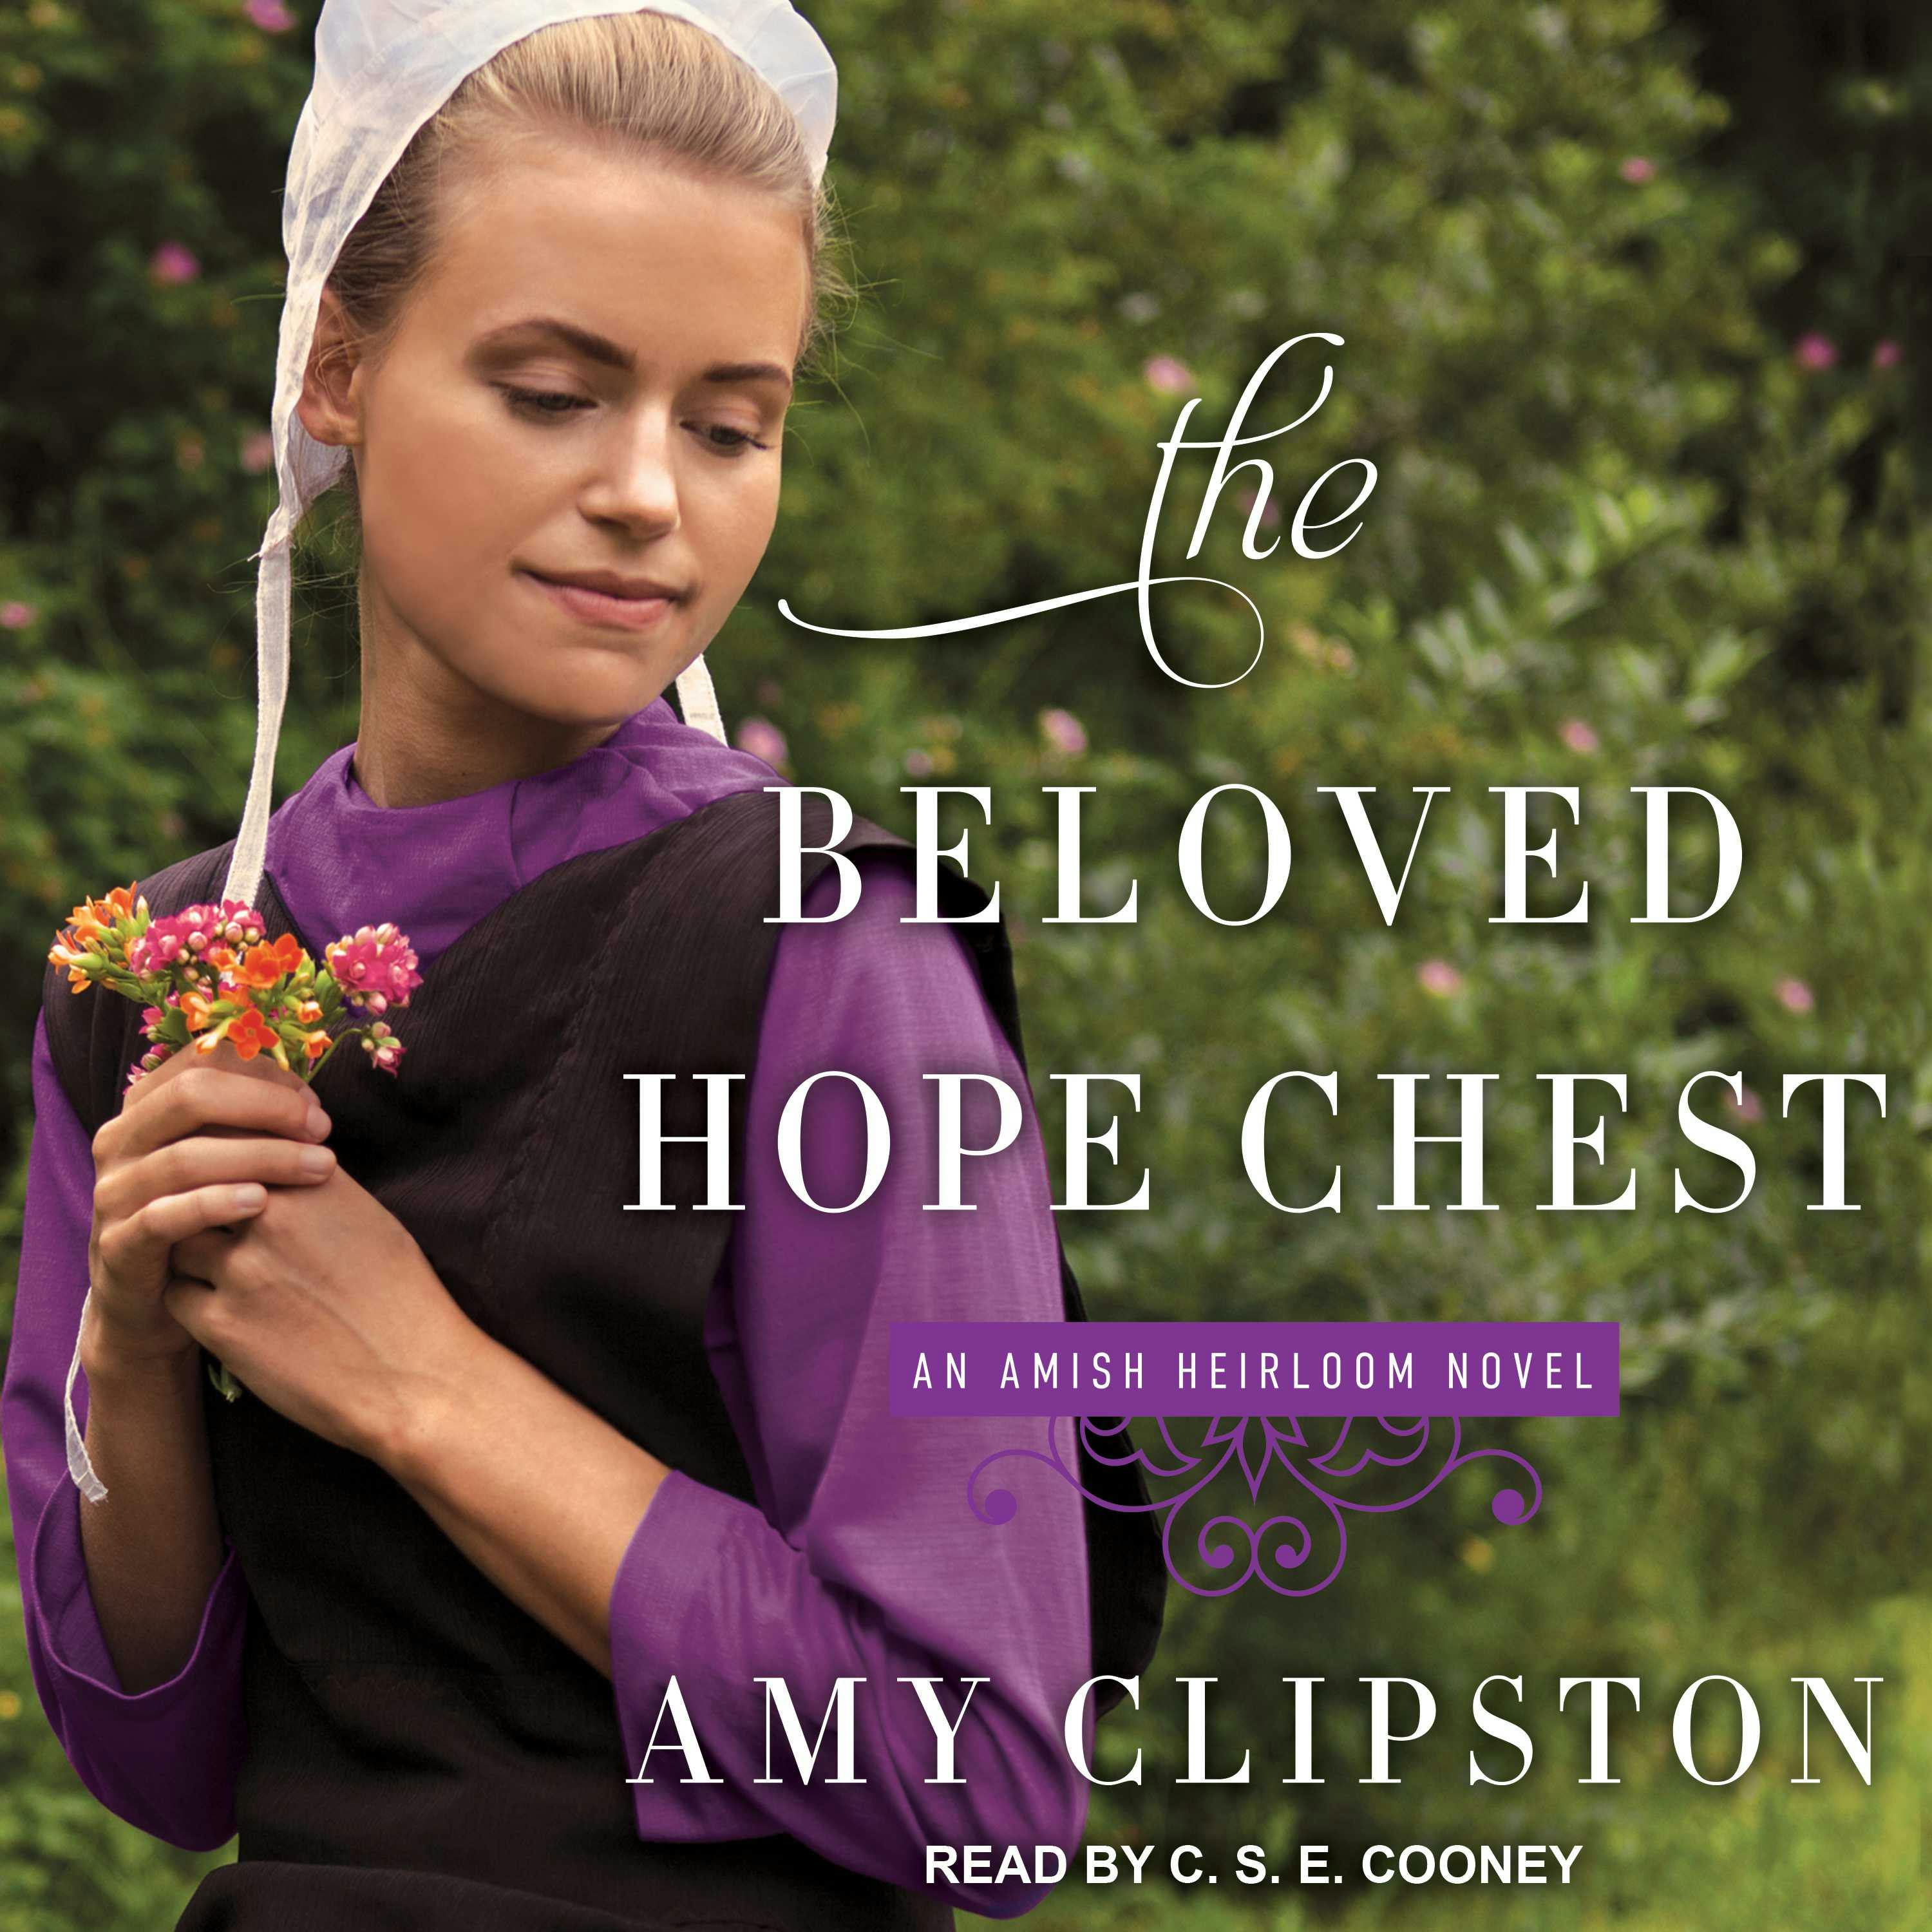 The Beloved Hope Chest: An Amish Heirloom Novel - Amy Clipston